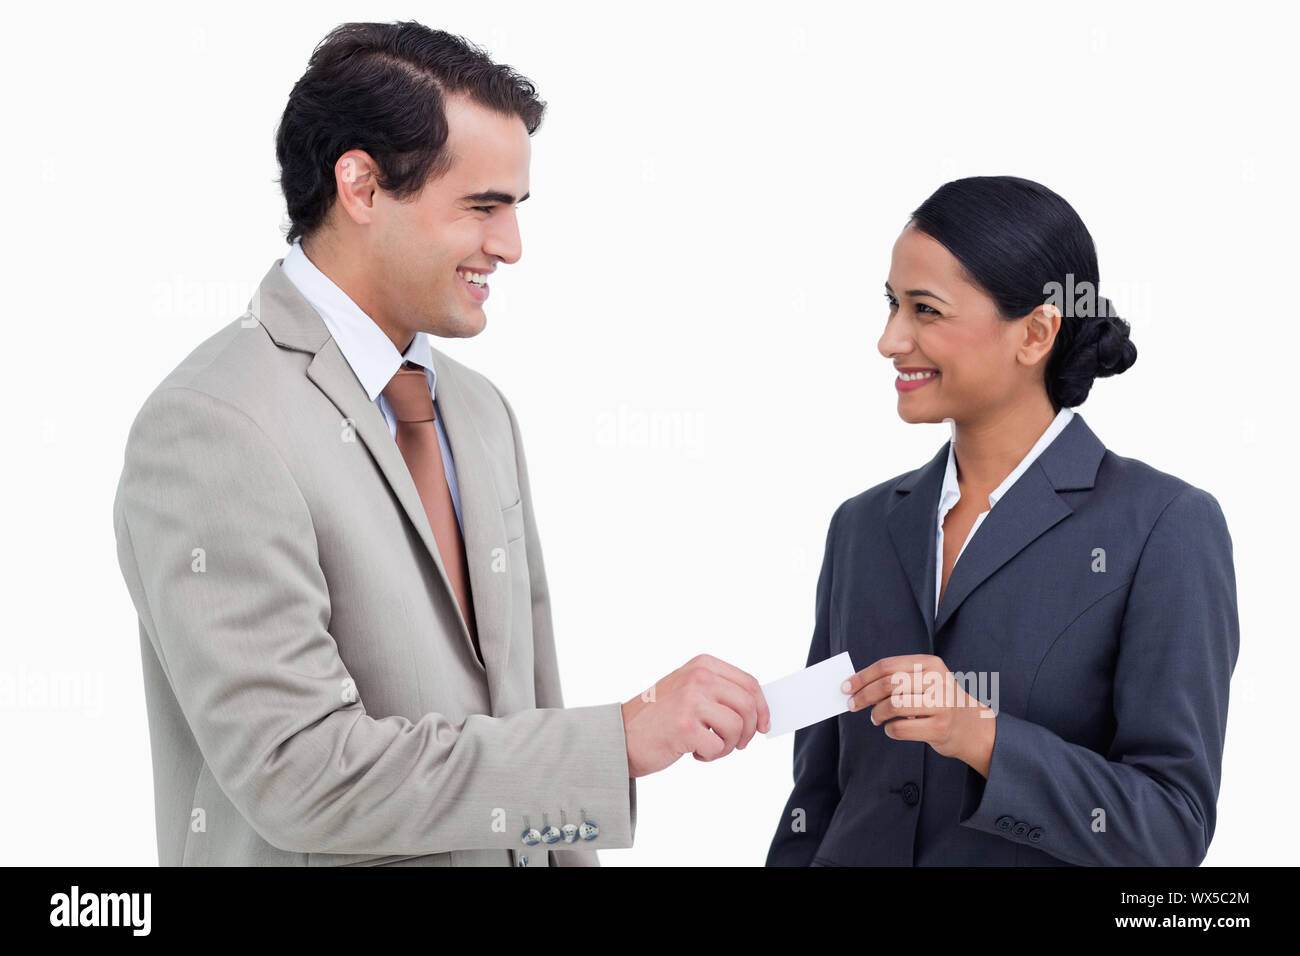 Smiling business people exchanging business cards against a white background Stock Photo